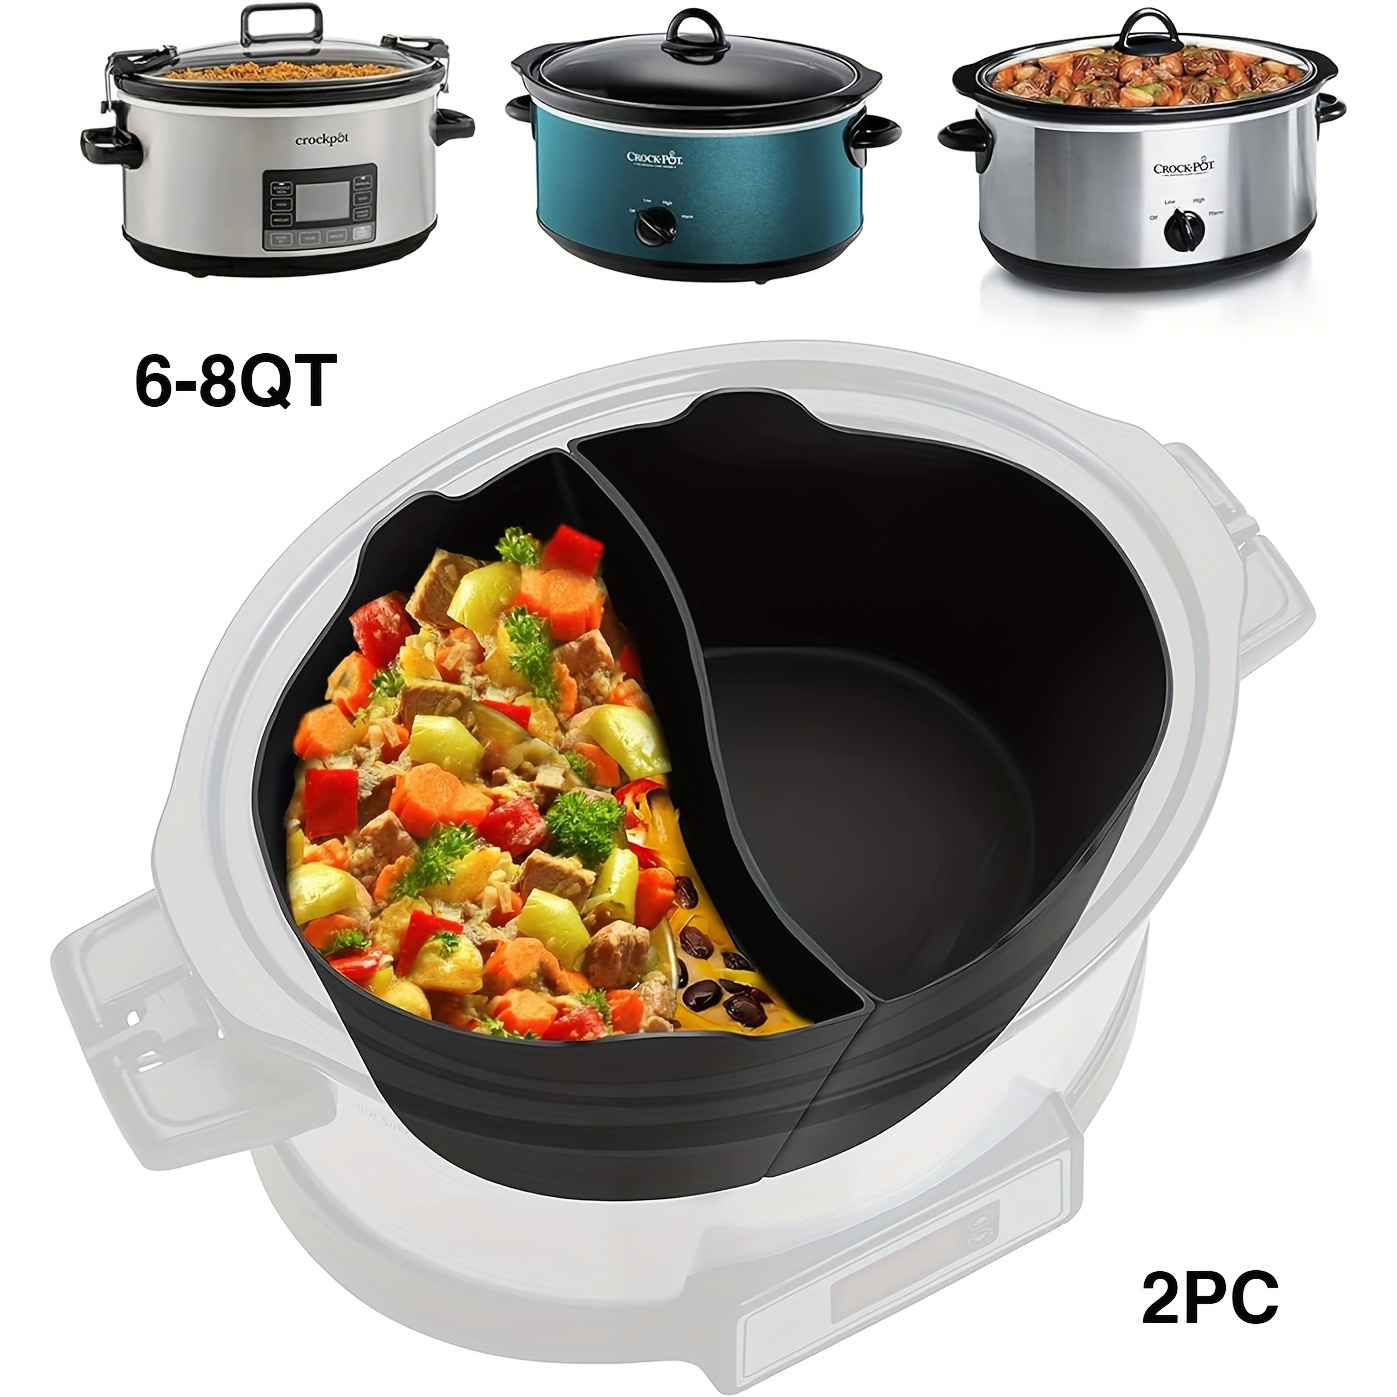 https://img.kwcdn.com/product/slow-cooker-silicone-liners/d69d2f15w98k18-c6e46d00/Fancyalgo/VirtualModelMatting/0796ae7a6a2052ad34fc87832082db97.jpg?imageView2/2/w/500/q/60/format/webp